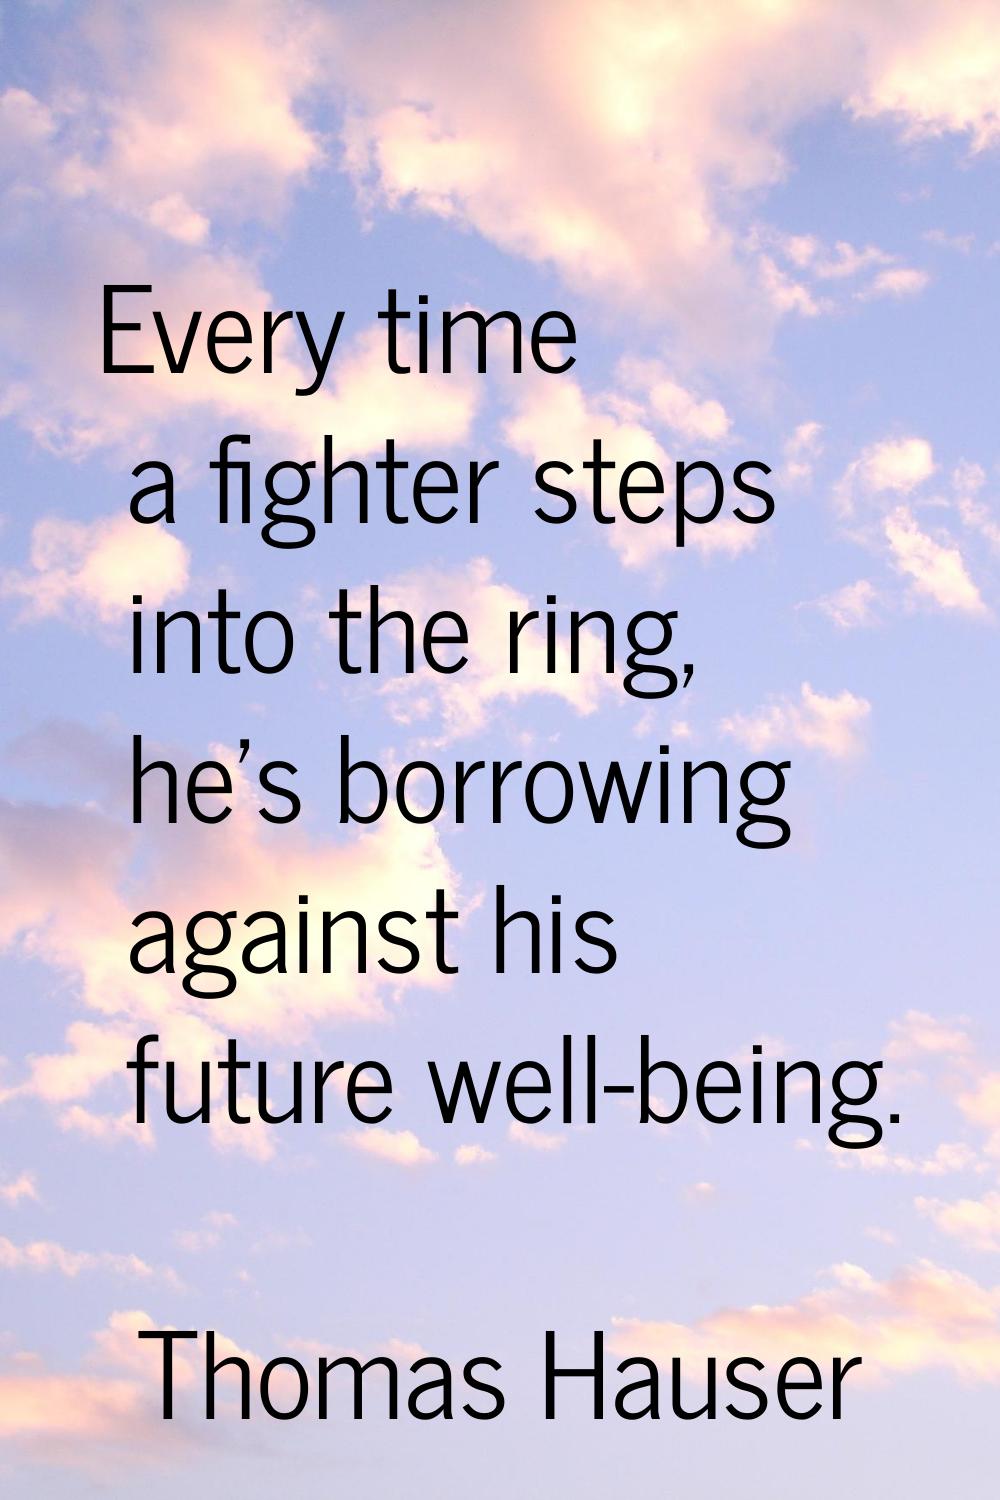 Every time a fighter steps into the ring, he's borrowing against his future well-being.